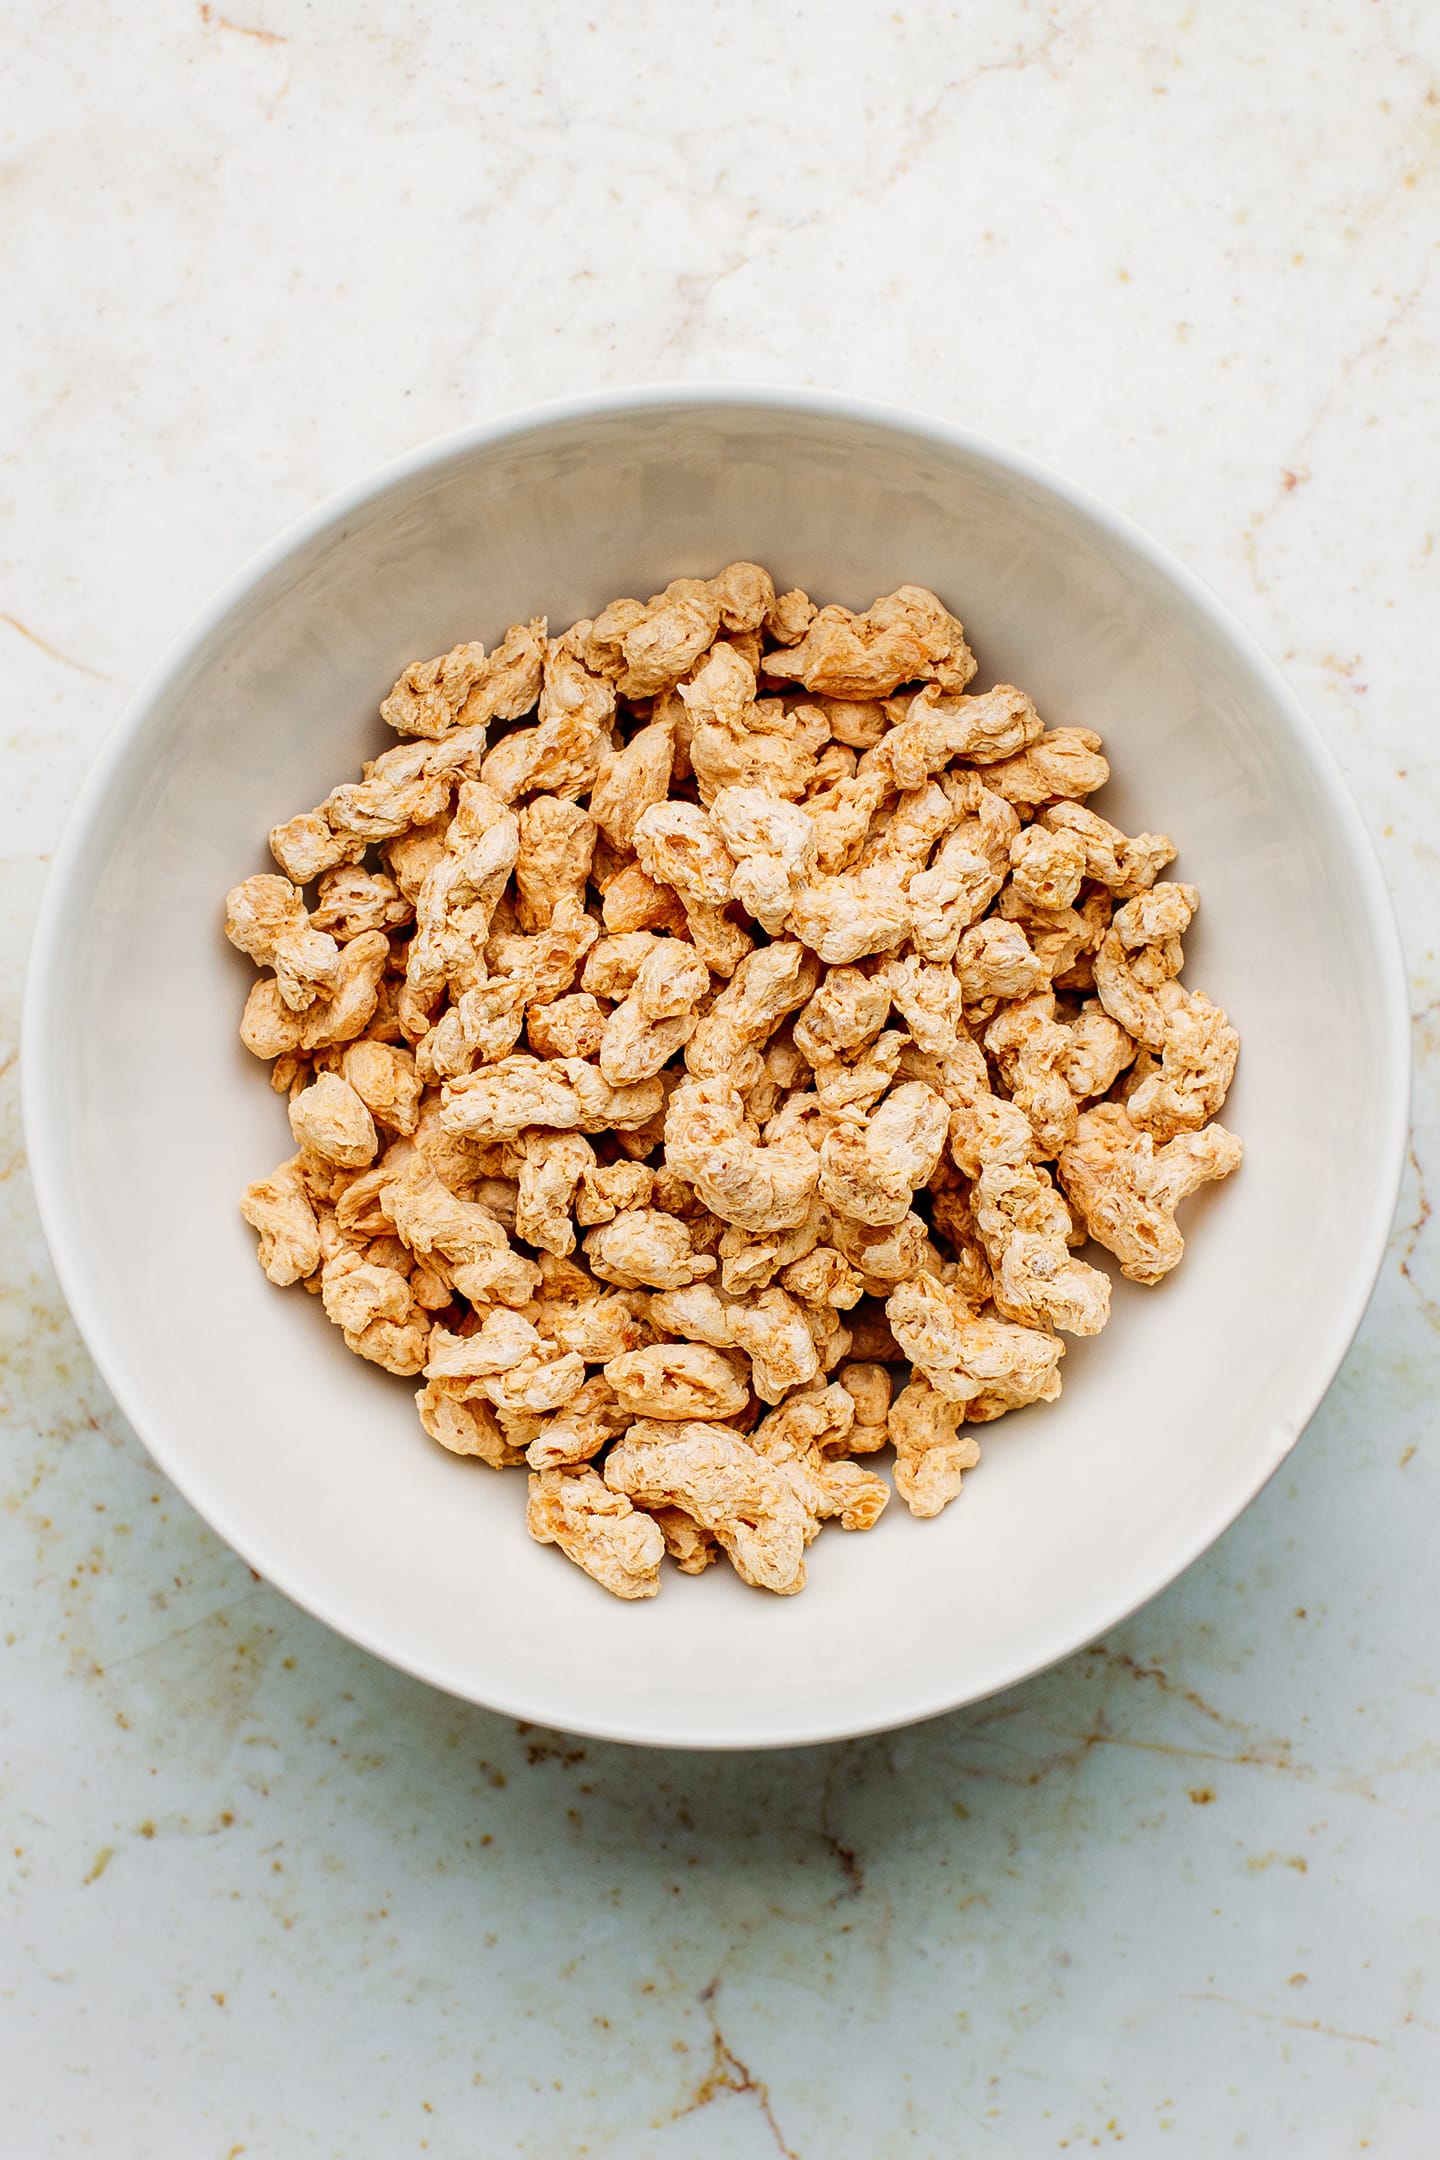 Dried soy curls in a bowl.